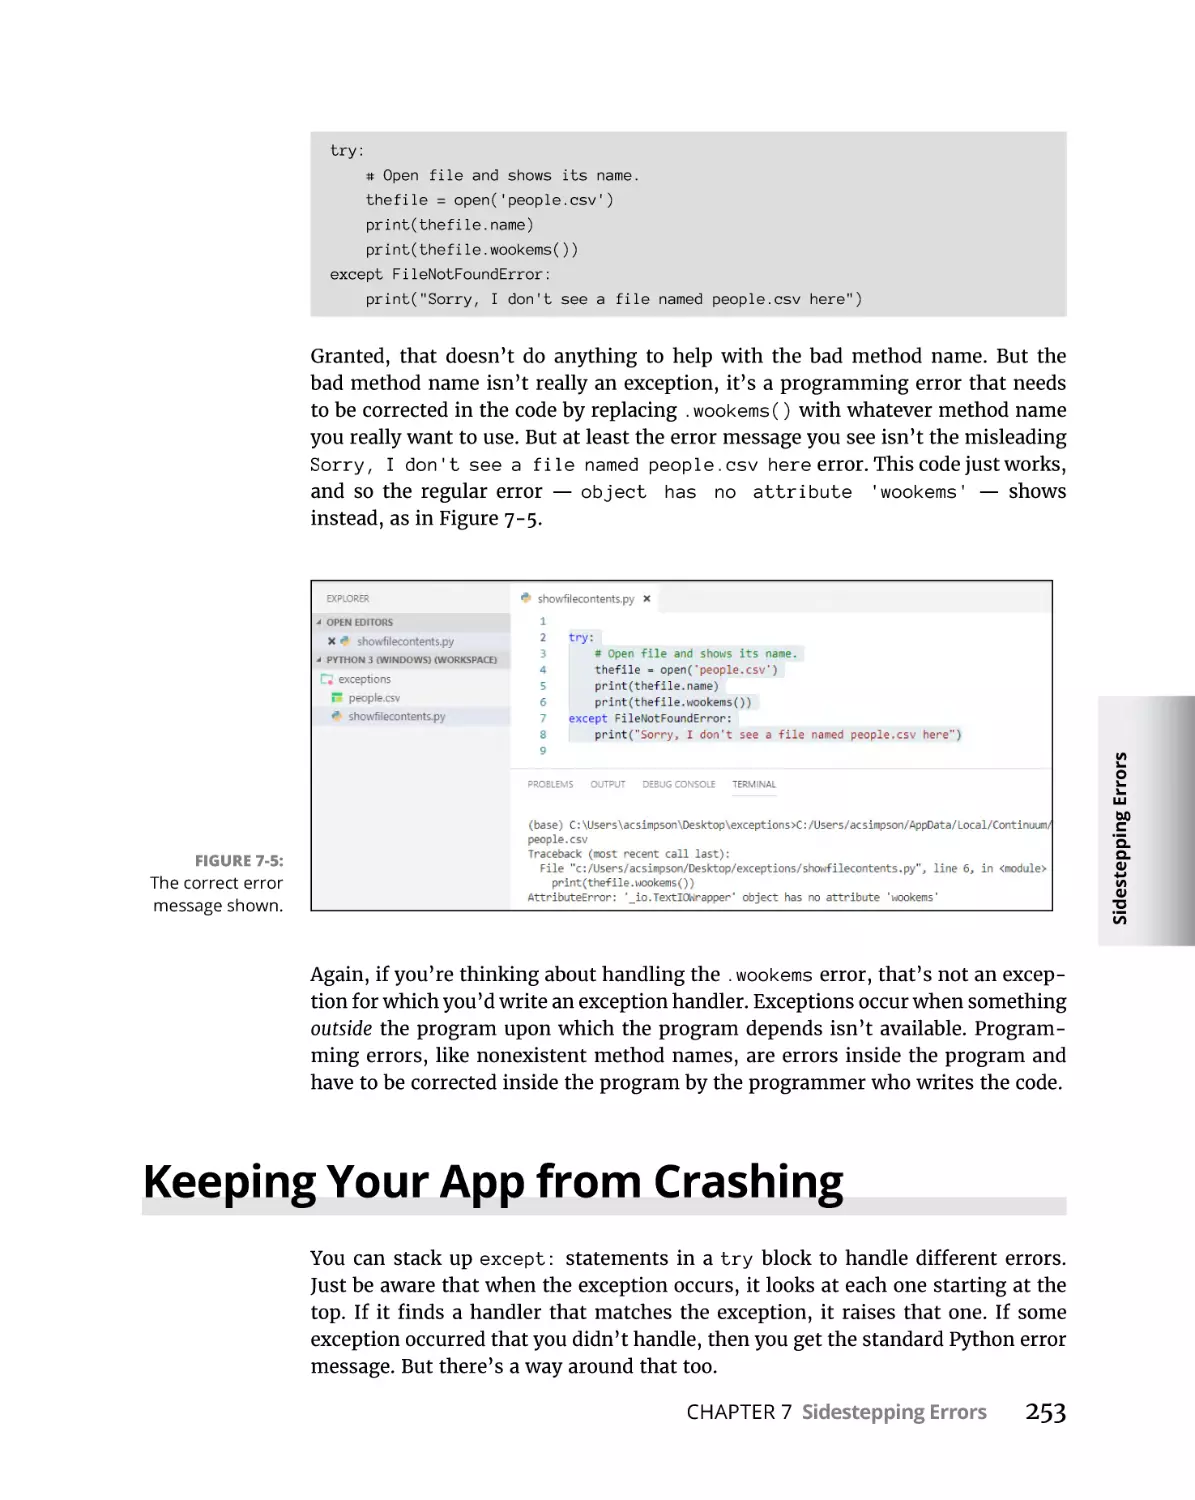 Keeping Your App from Crashing